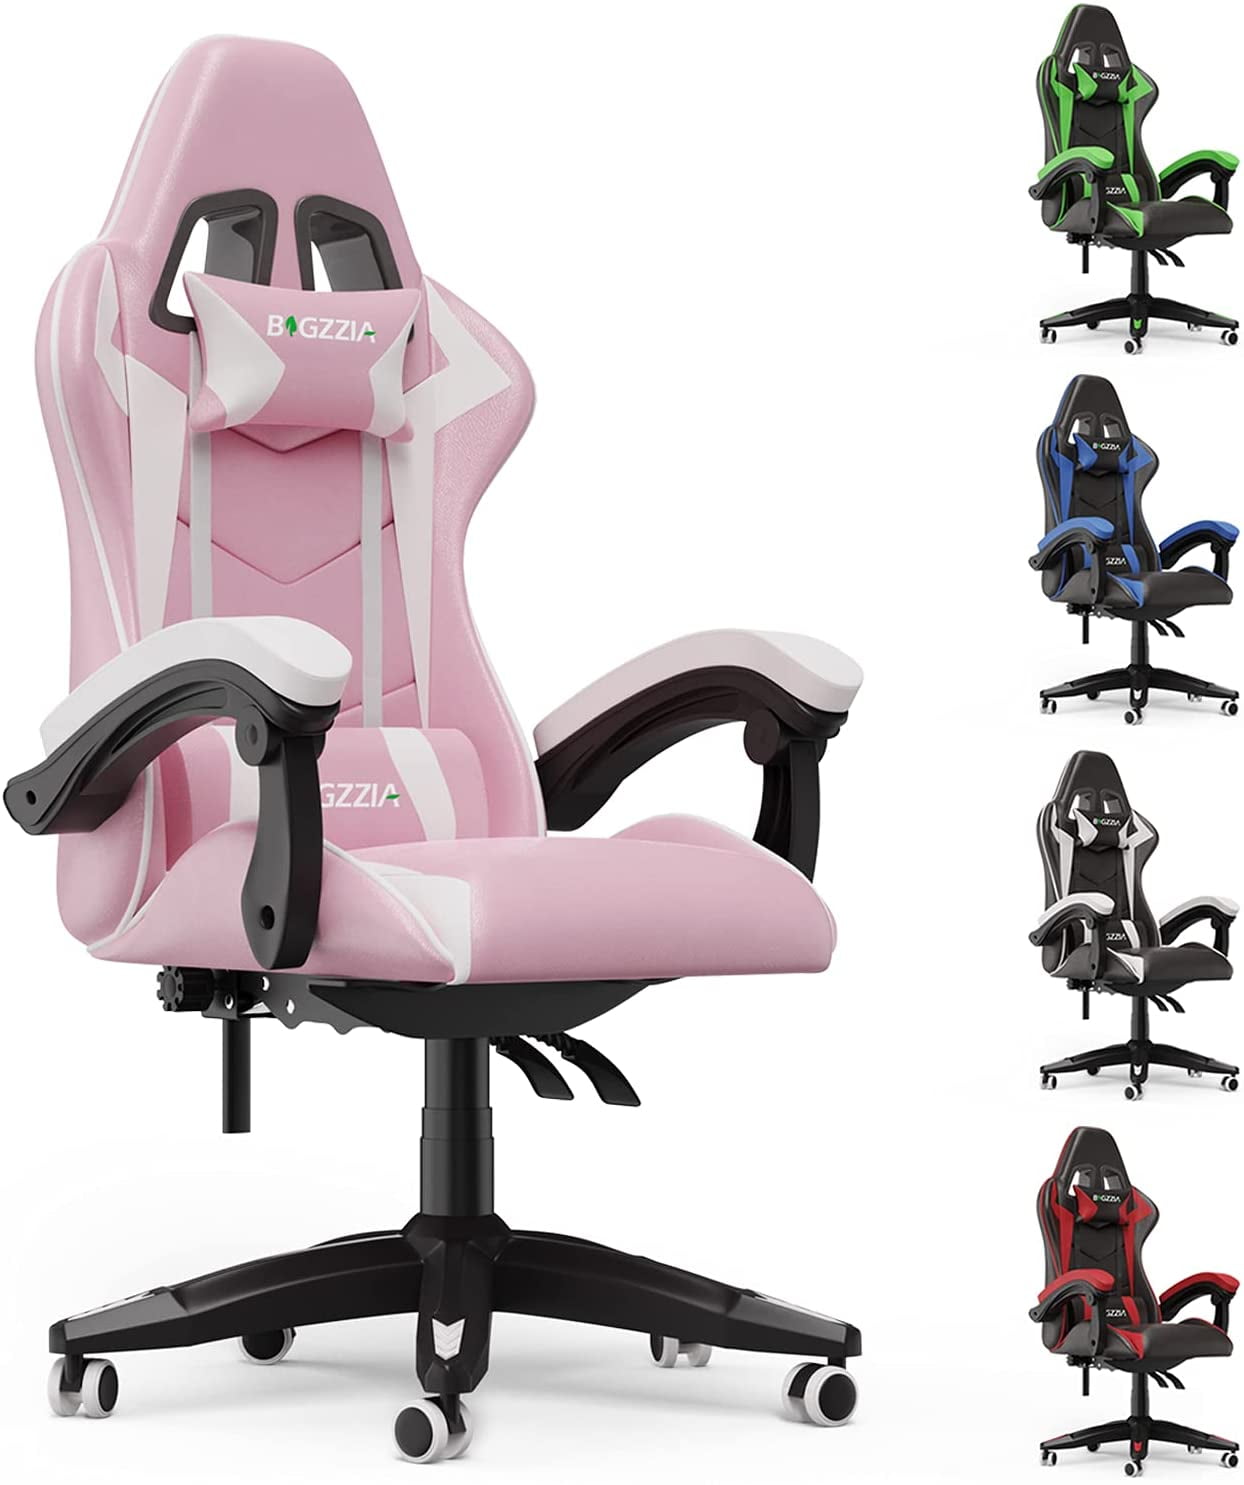  Pink Gaming Chair Walmart with Simple Decor